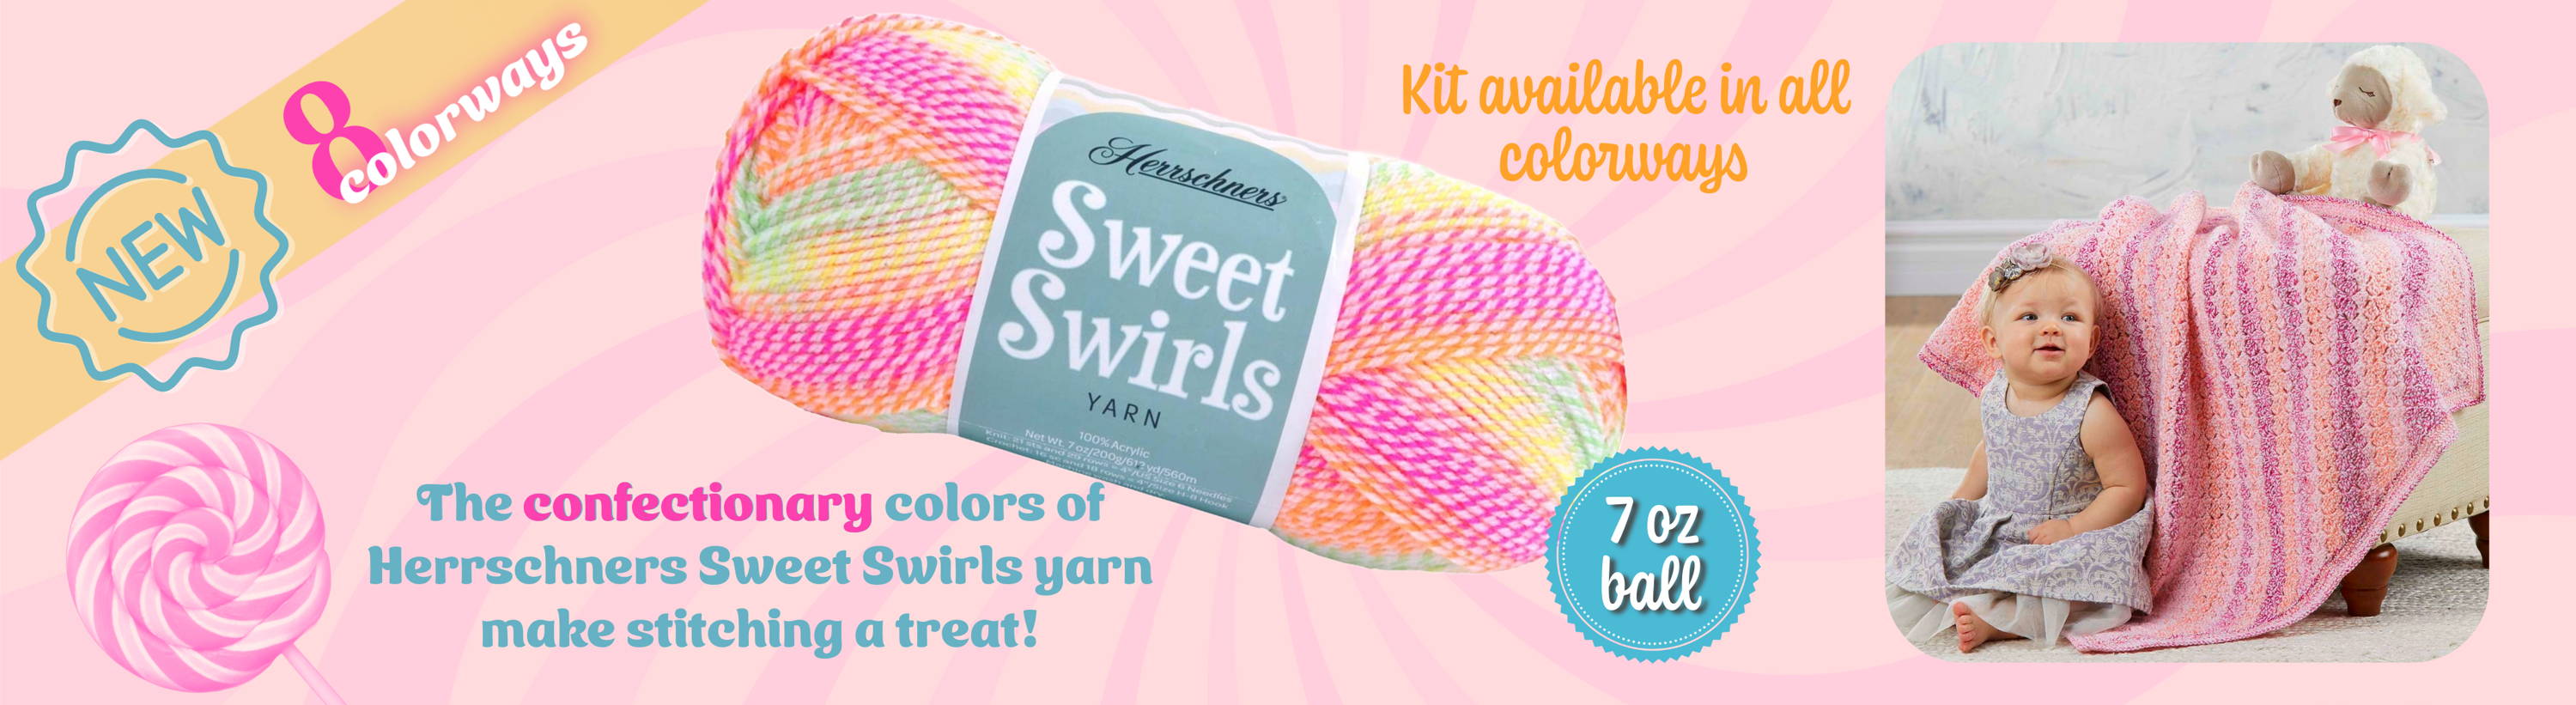 New! Herrschners Sweet Swirls ™ Yarn: Available in 8 colorways. The confectionary colors of Herrschners Sweet Swirls yarn make stitching a treat! 7 oz ball. Kit available in all colorways. Image of baby and afghan made of Sweet Swirls yarn. 